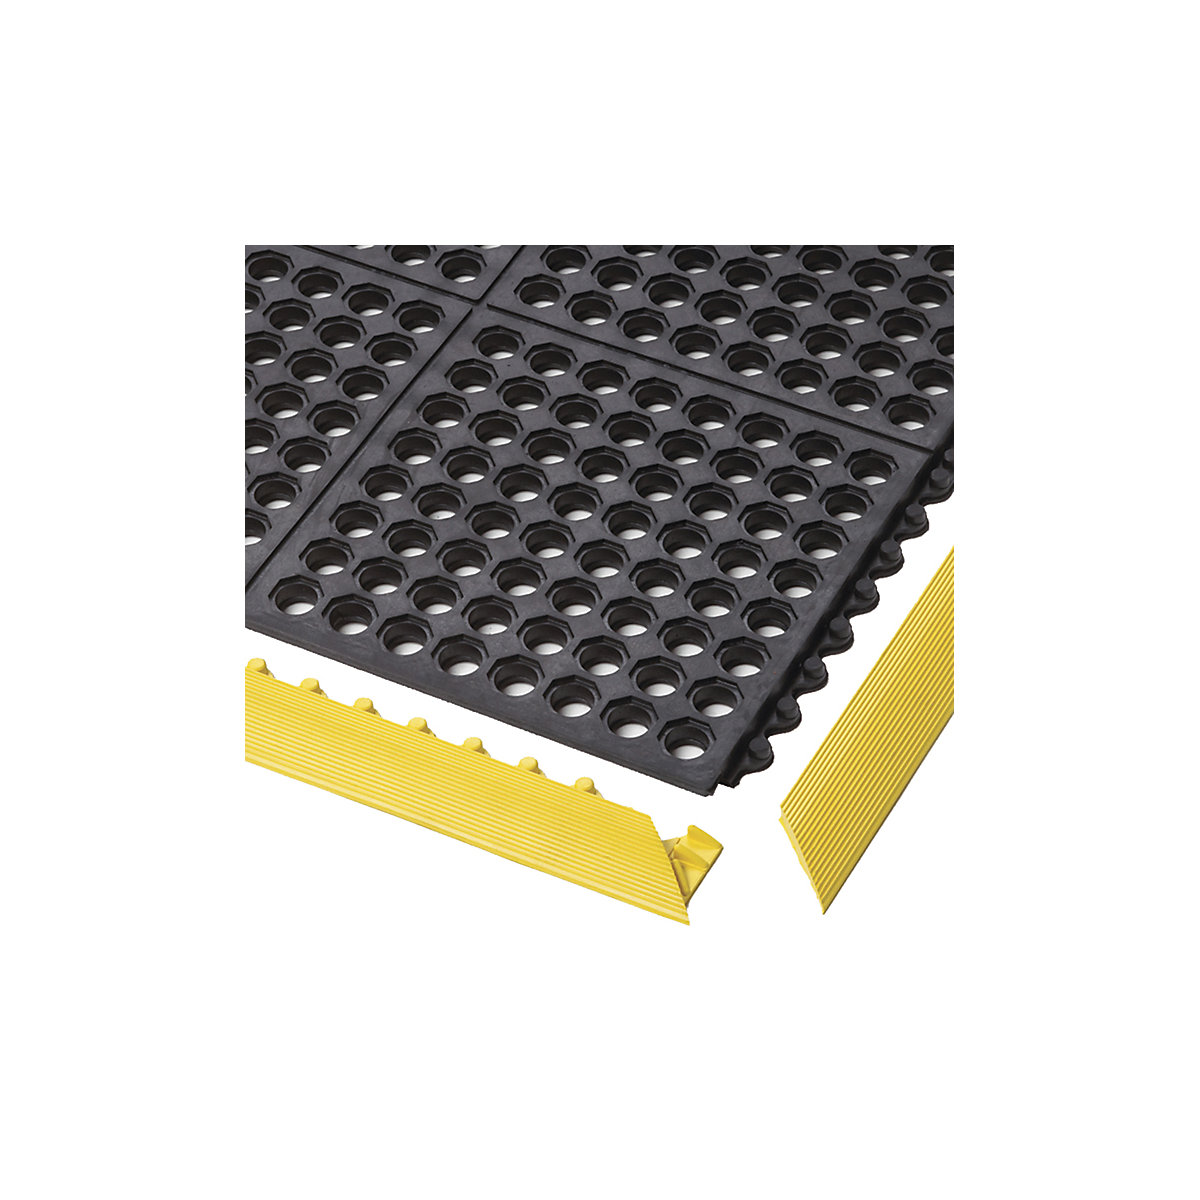 Cushion Ease™ perforated nitrile rubber plug-in system - NOTRAX